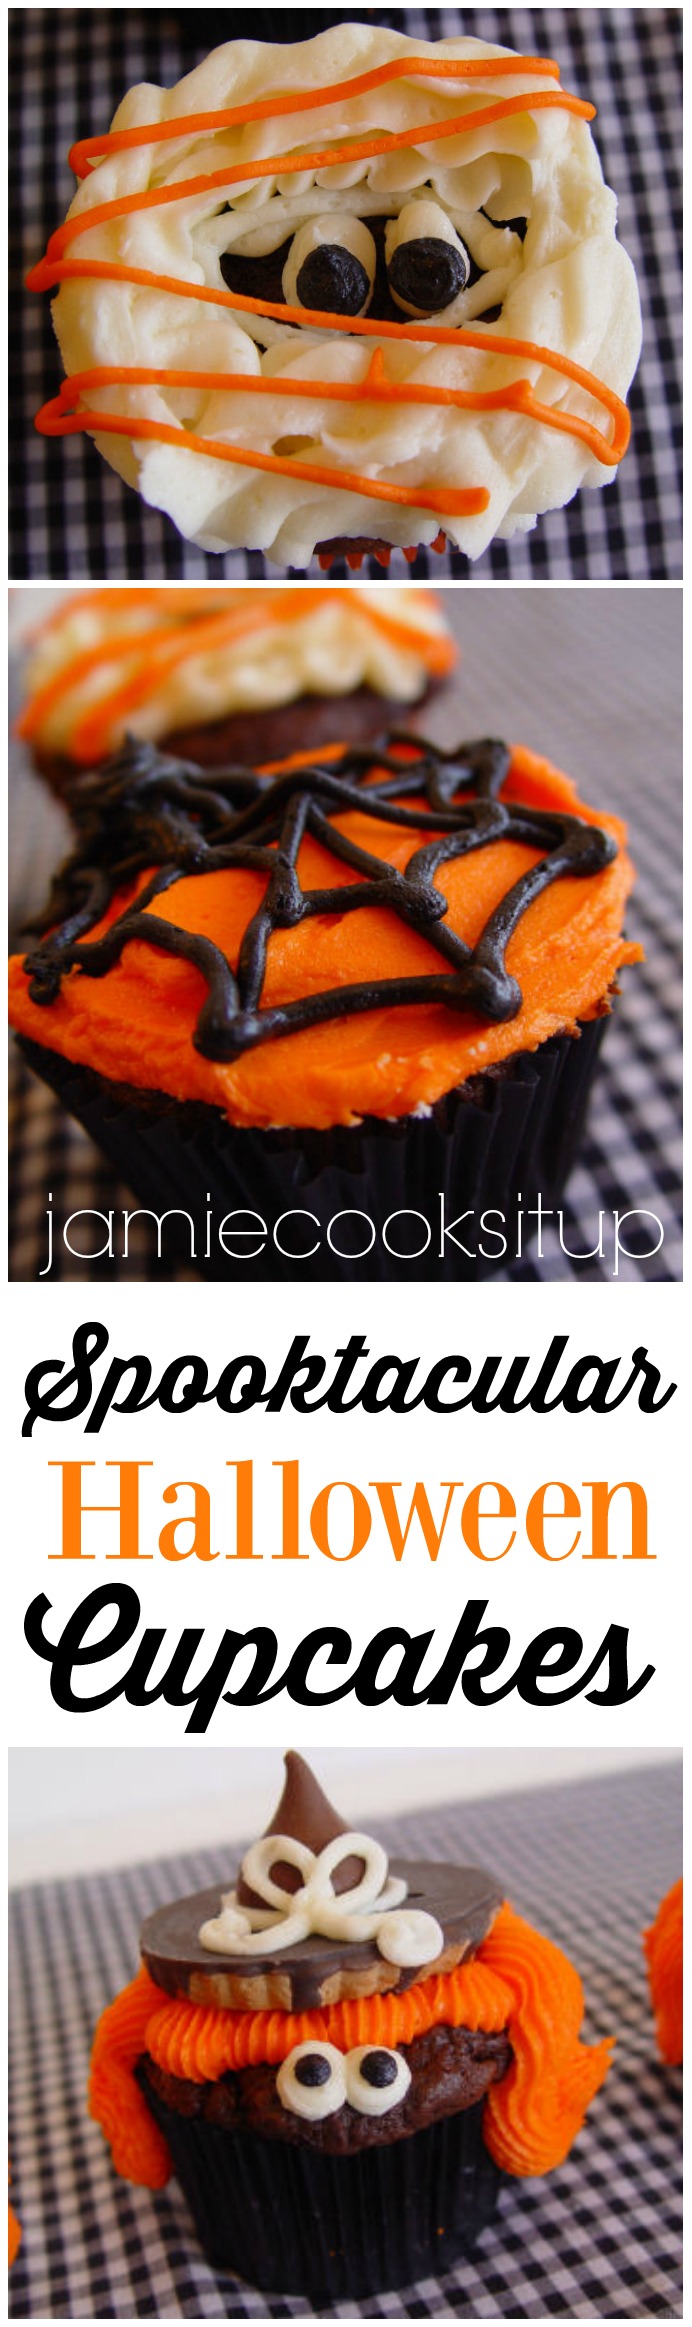 spooktacular-halloween-cupcakes-from-jamie-cooks-it-up